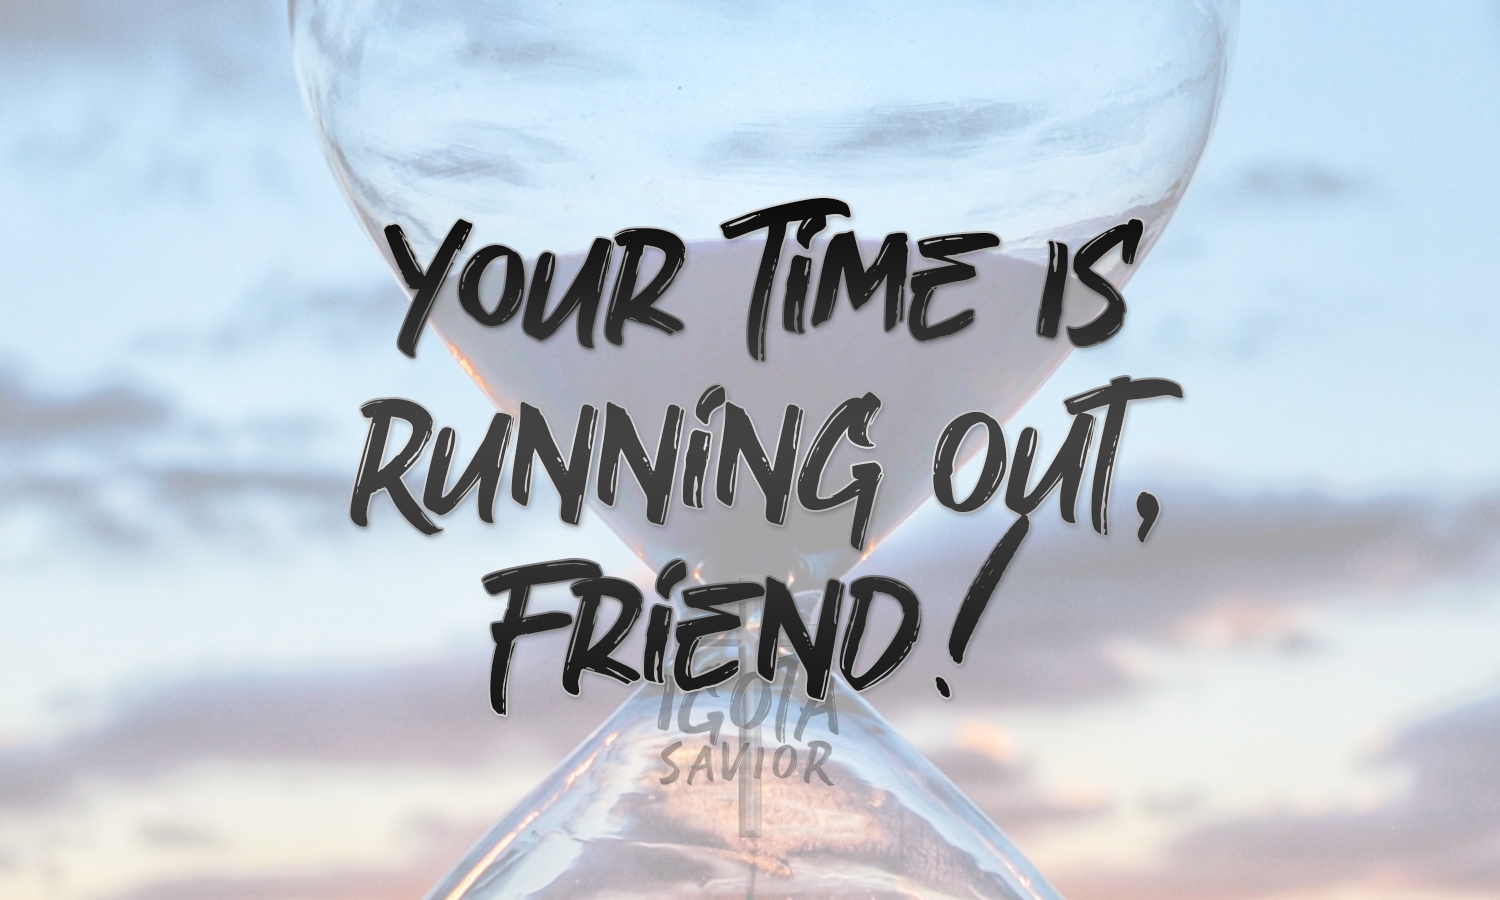 Your Time Is Running Out Friend!